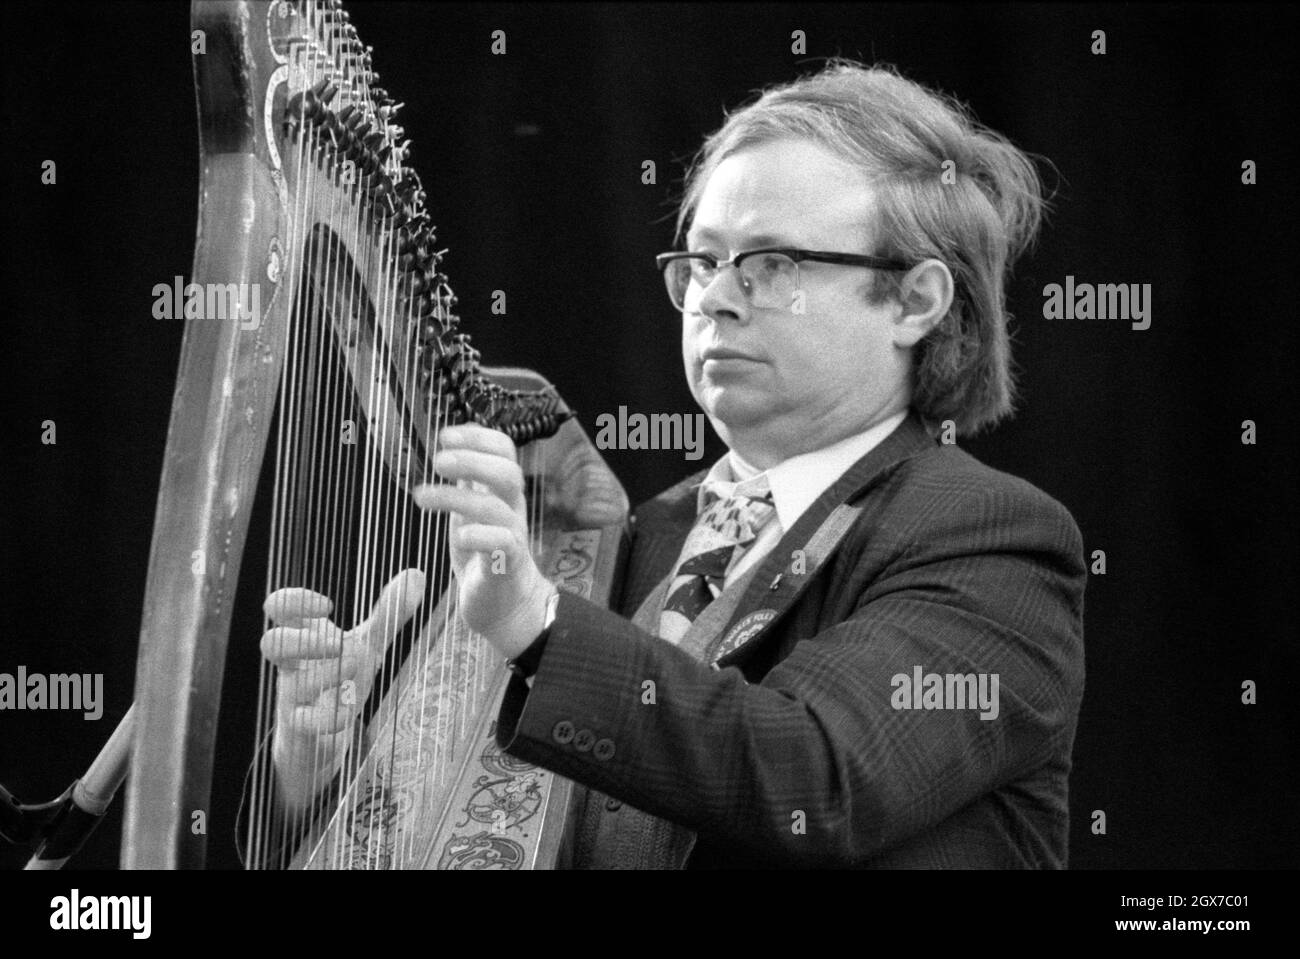 Harpist Derek Bell, MBE performing with The Chieftains at the July Wakes folk festival in Chorley, Lancashire, England on 25 July 1976. Stock Photo